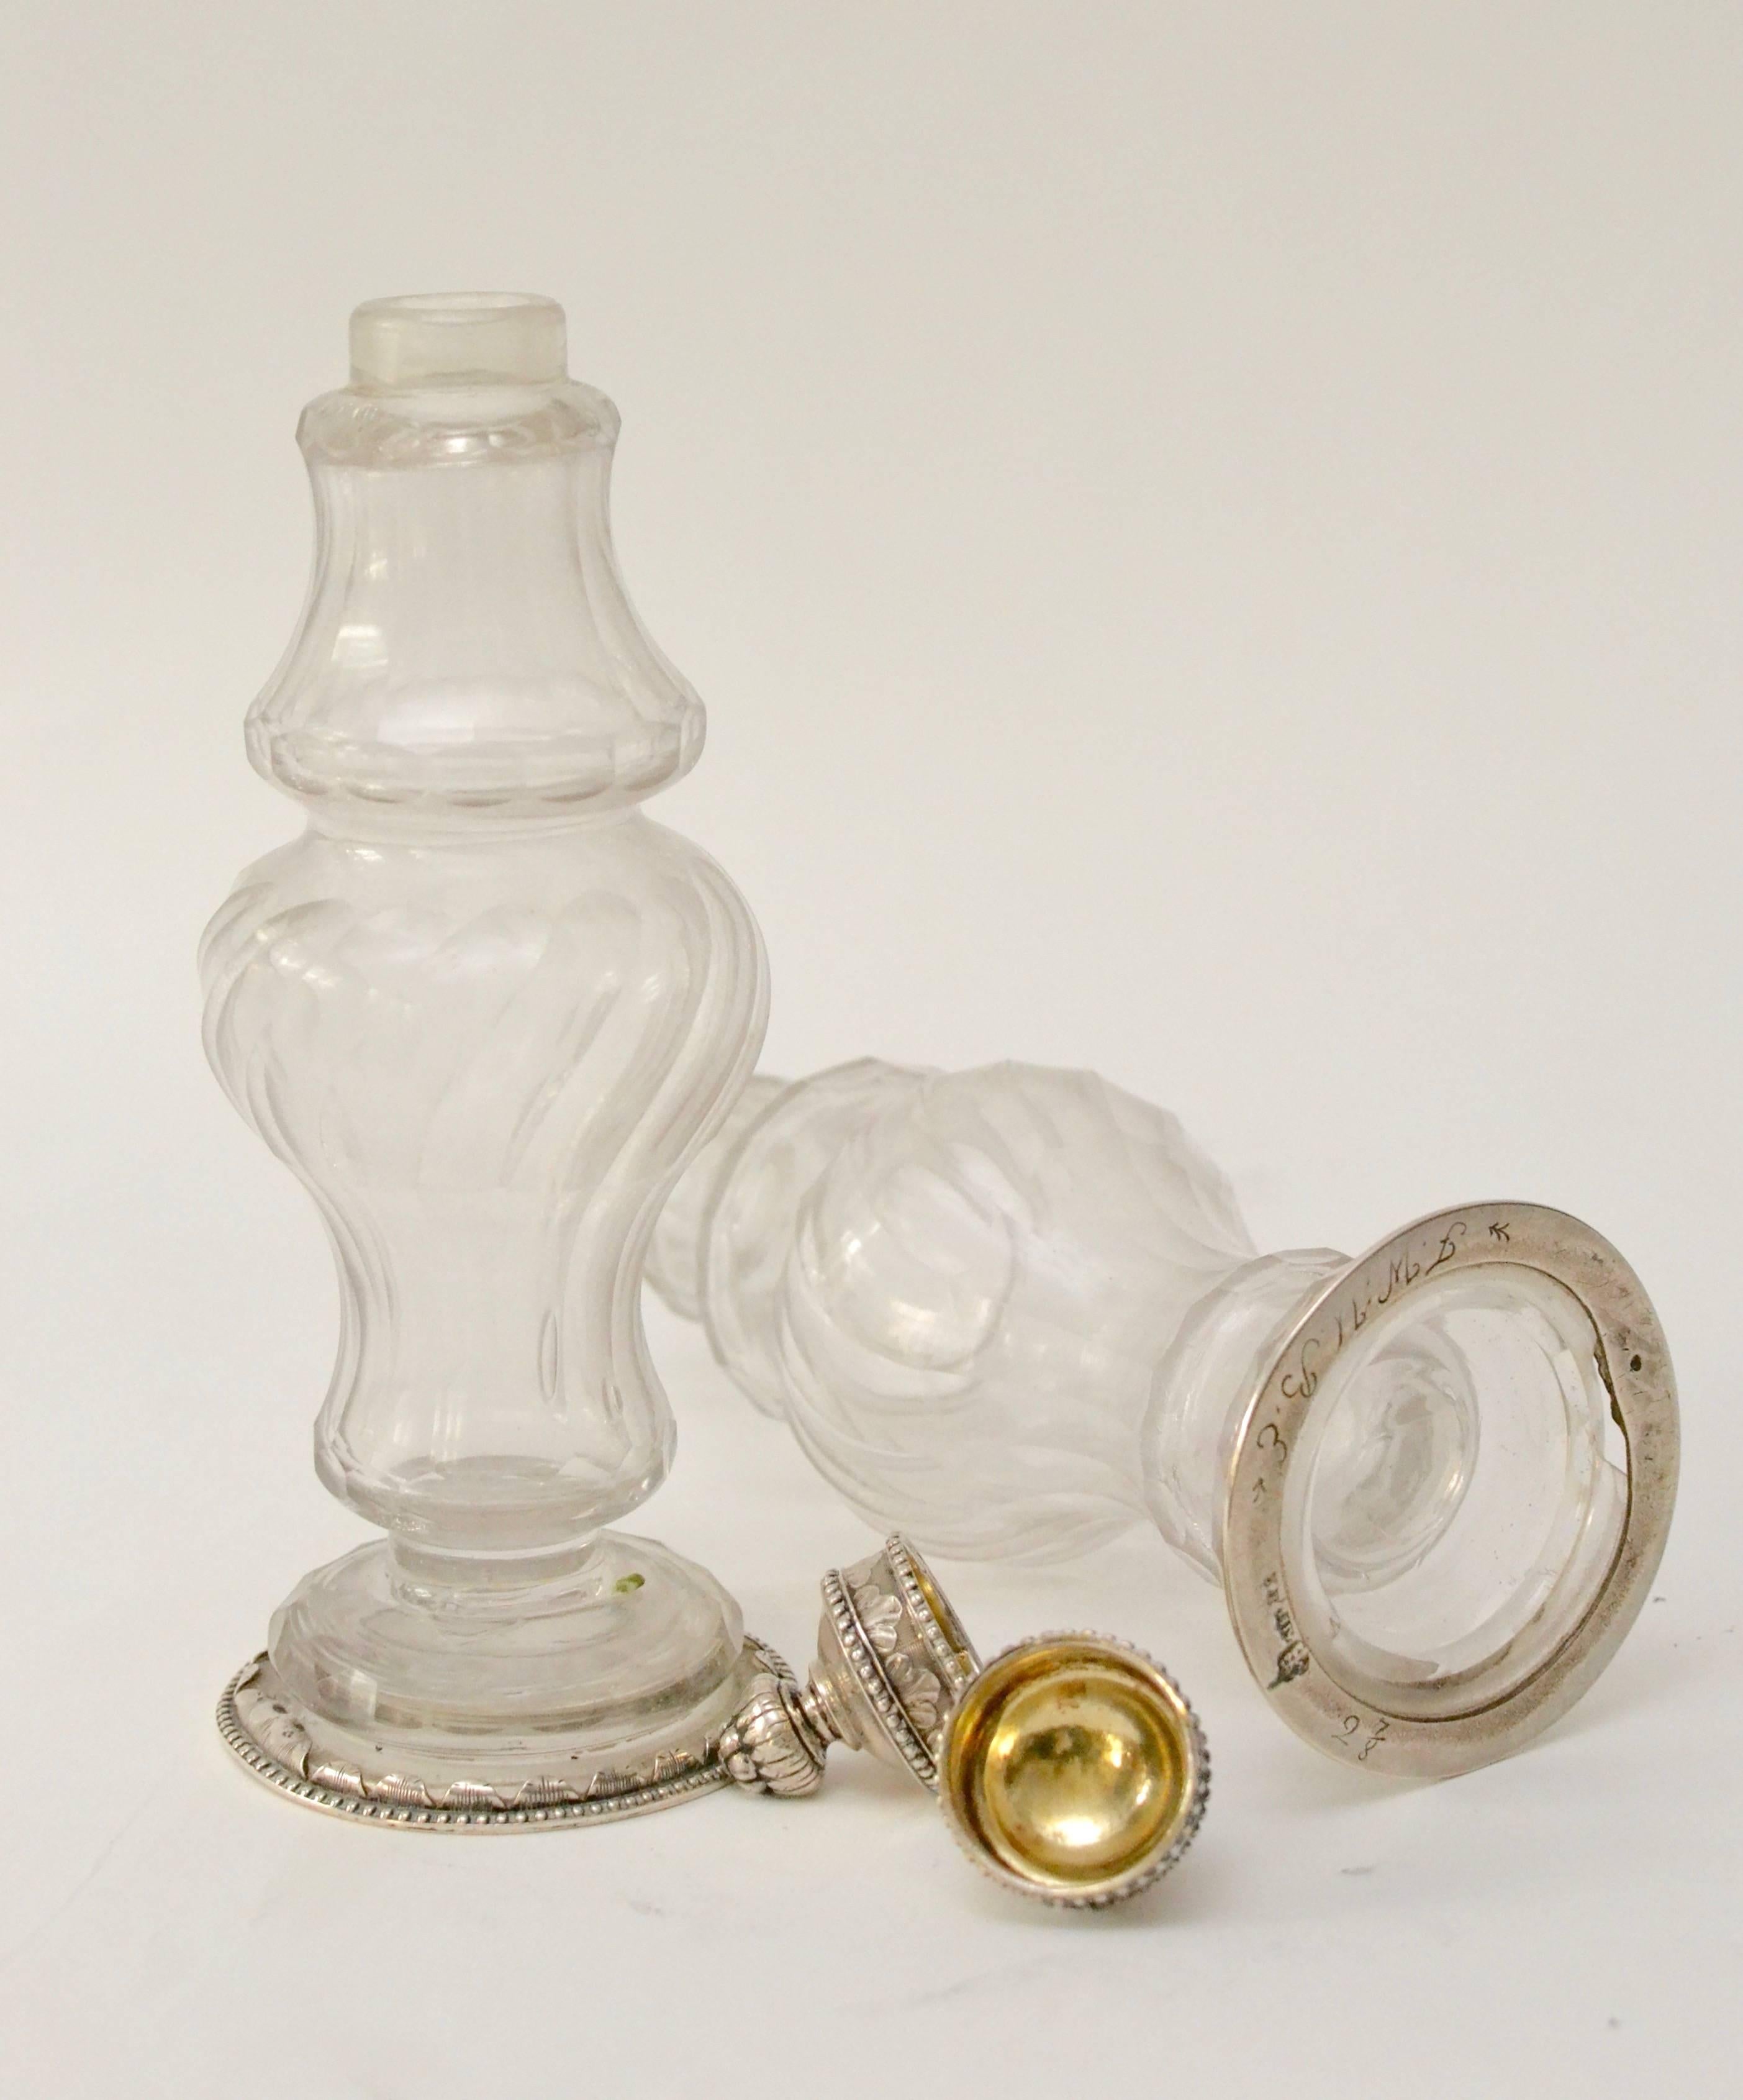 A pair of Swedish, 18th century silver-mounted cut-glass vinegar and oil bottles by Andreas Isberg, 1790. Signed.